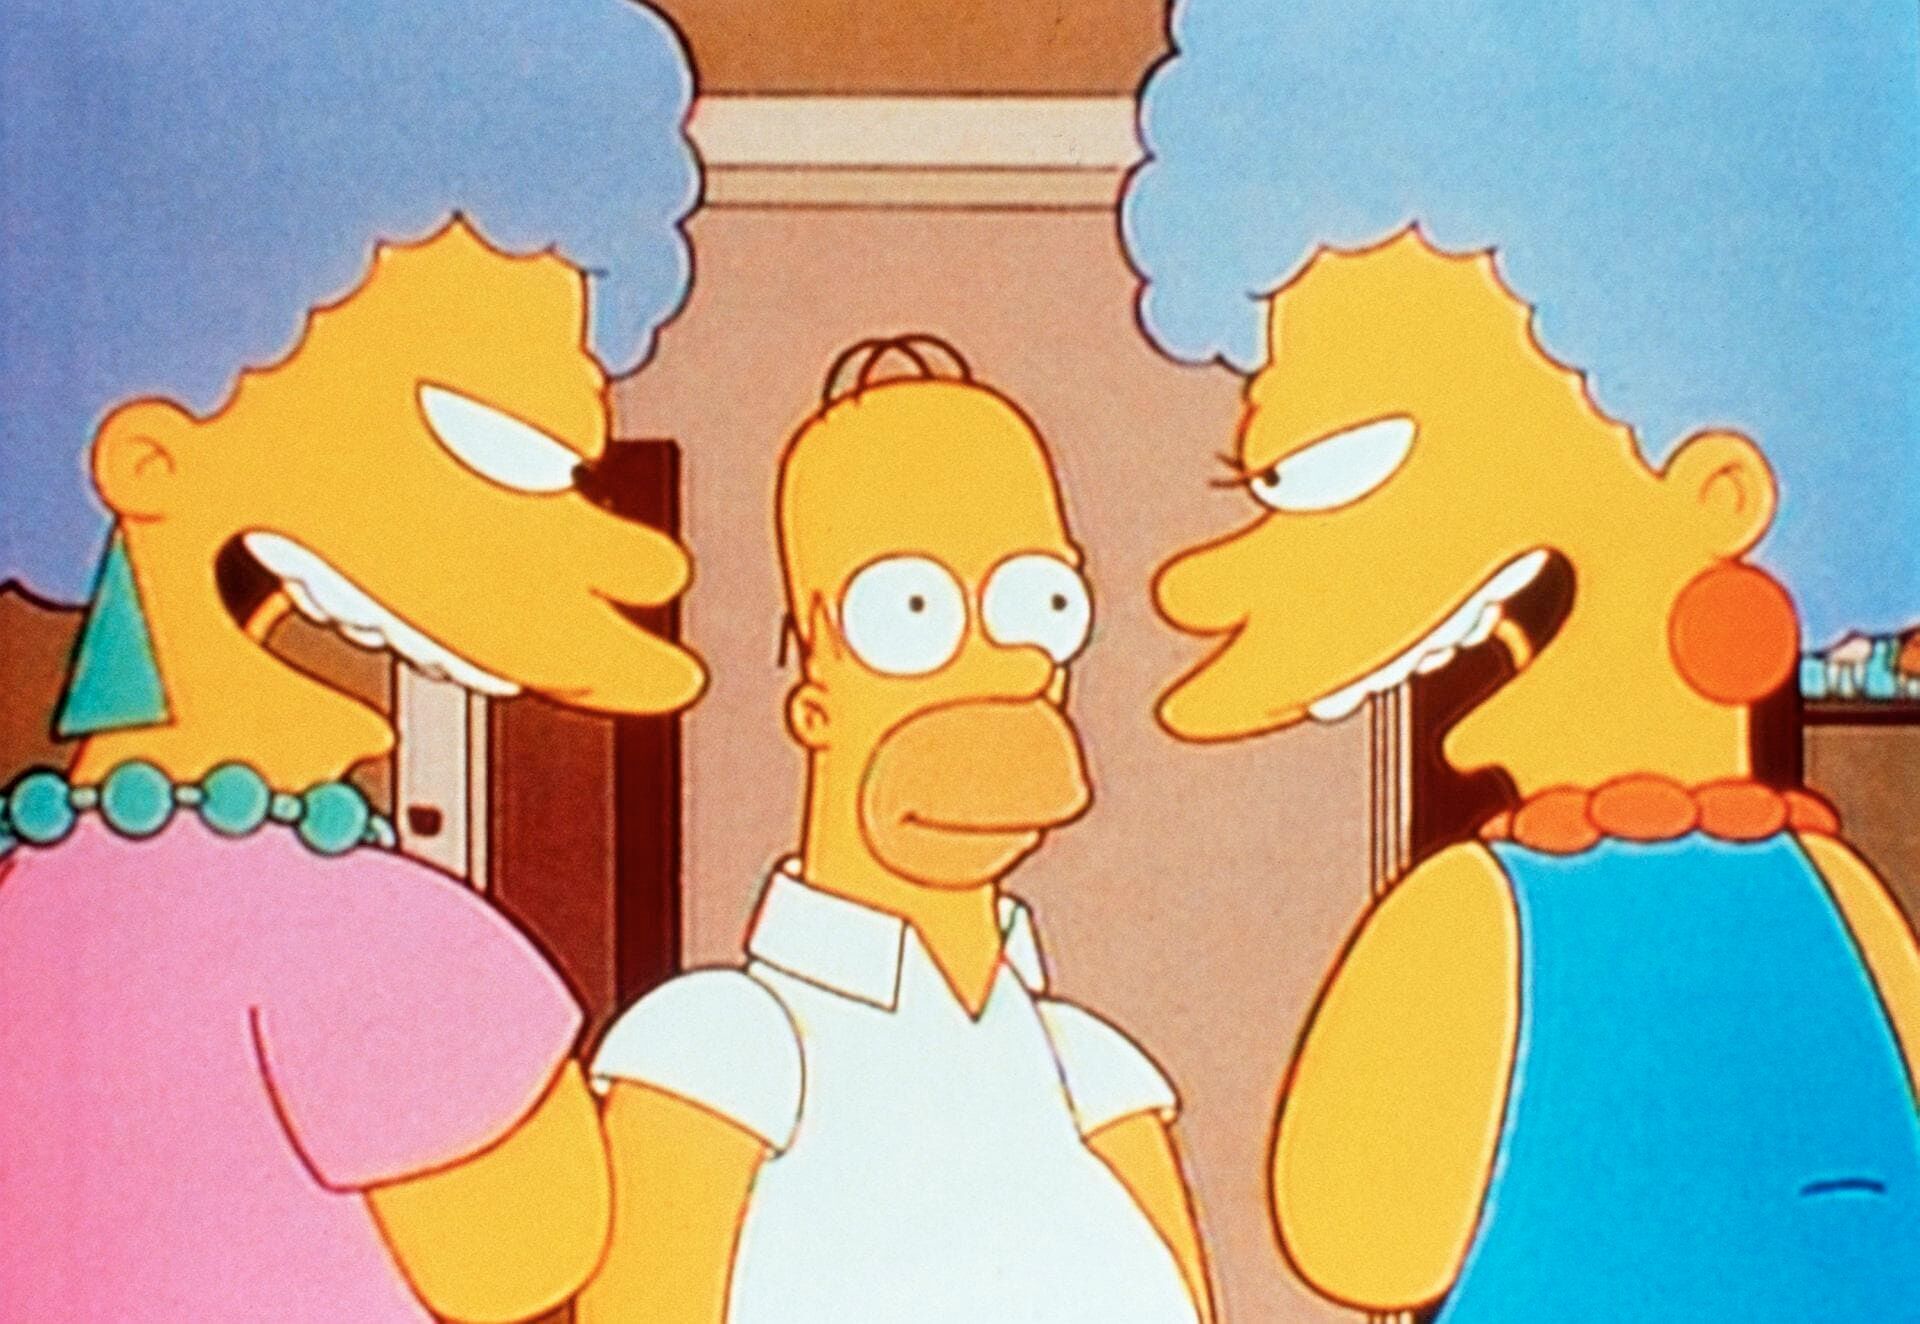 The Simpsons - Homer vs. Patty and Selma